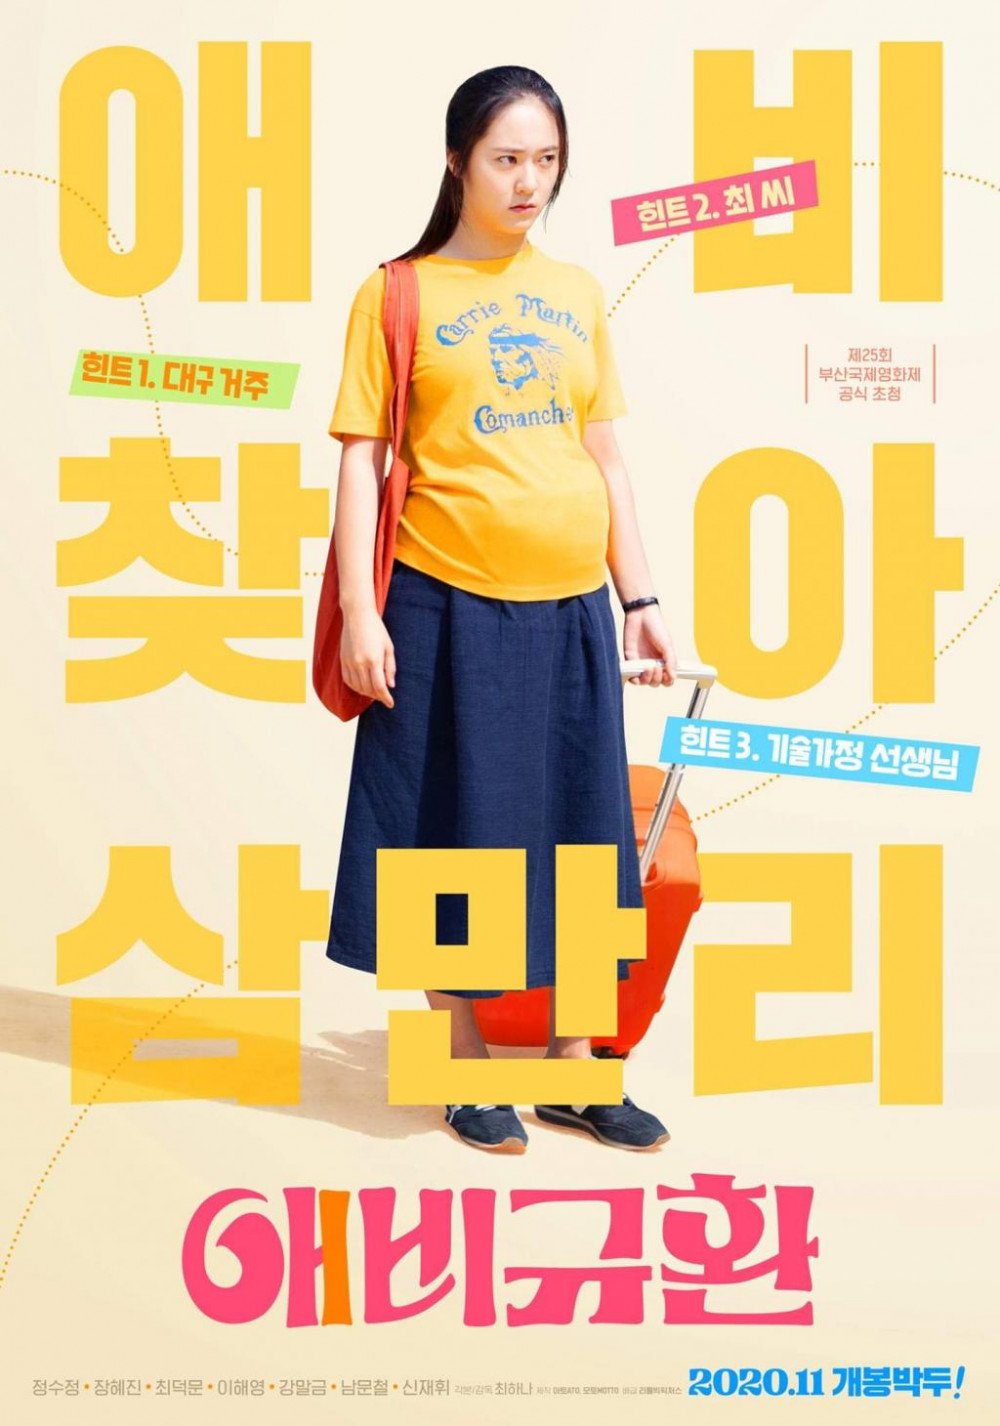 krystal-is-a-tough-straightforward-pregnant-21-year-old-in-her-new-film-more-than-family-teaser-trailer-poster-1